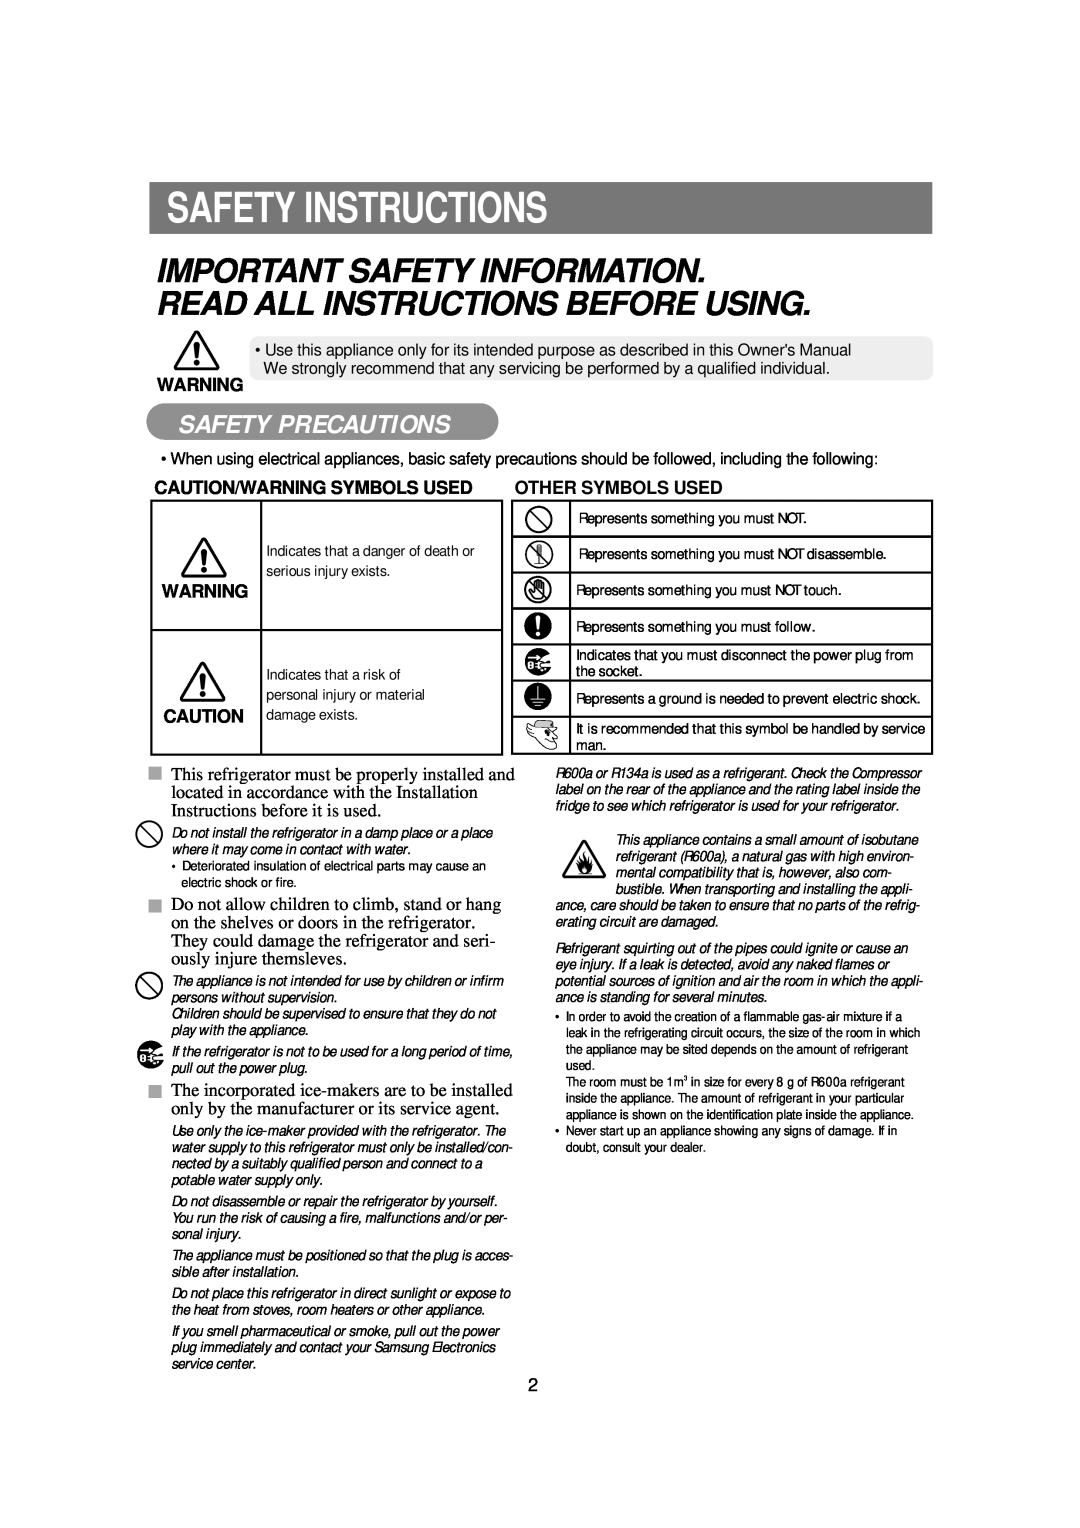 Samsung RSE8KPUS1/BUL manual Safety Instructions, Safety Precautions, Caution/Warning Symbols Used, Other Symbols Used 